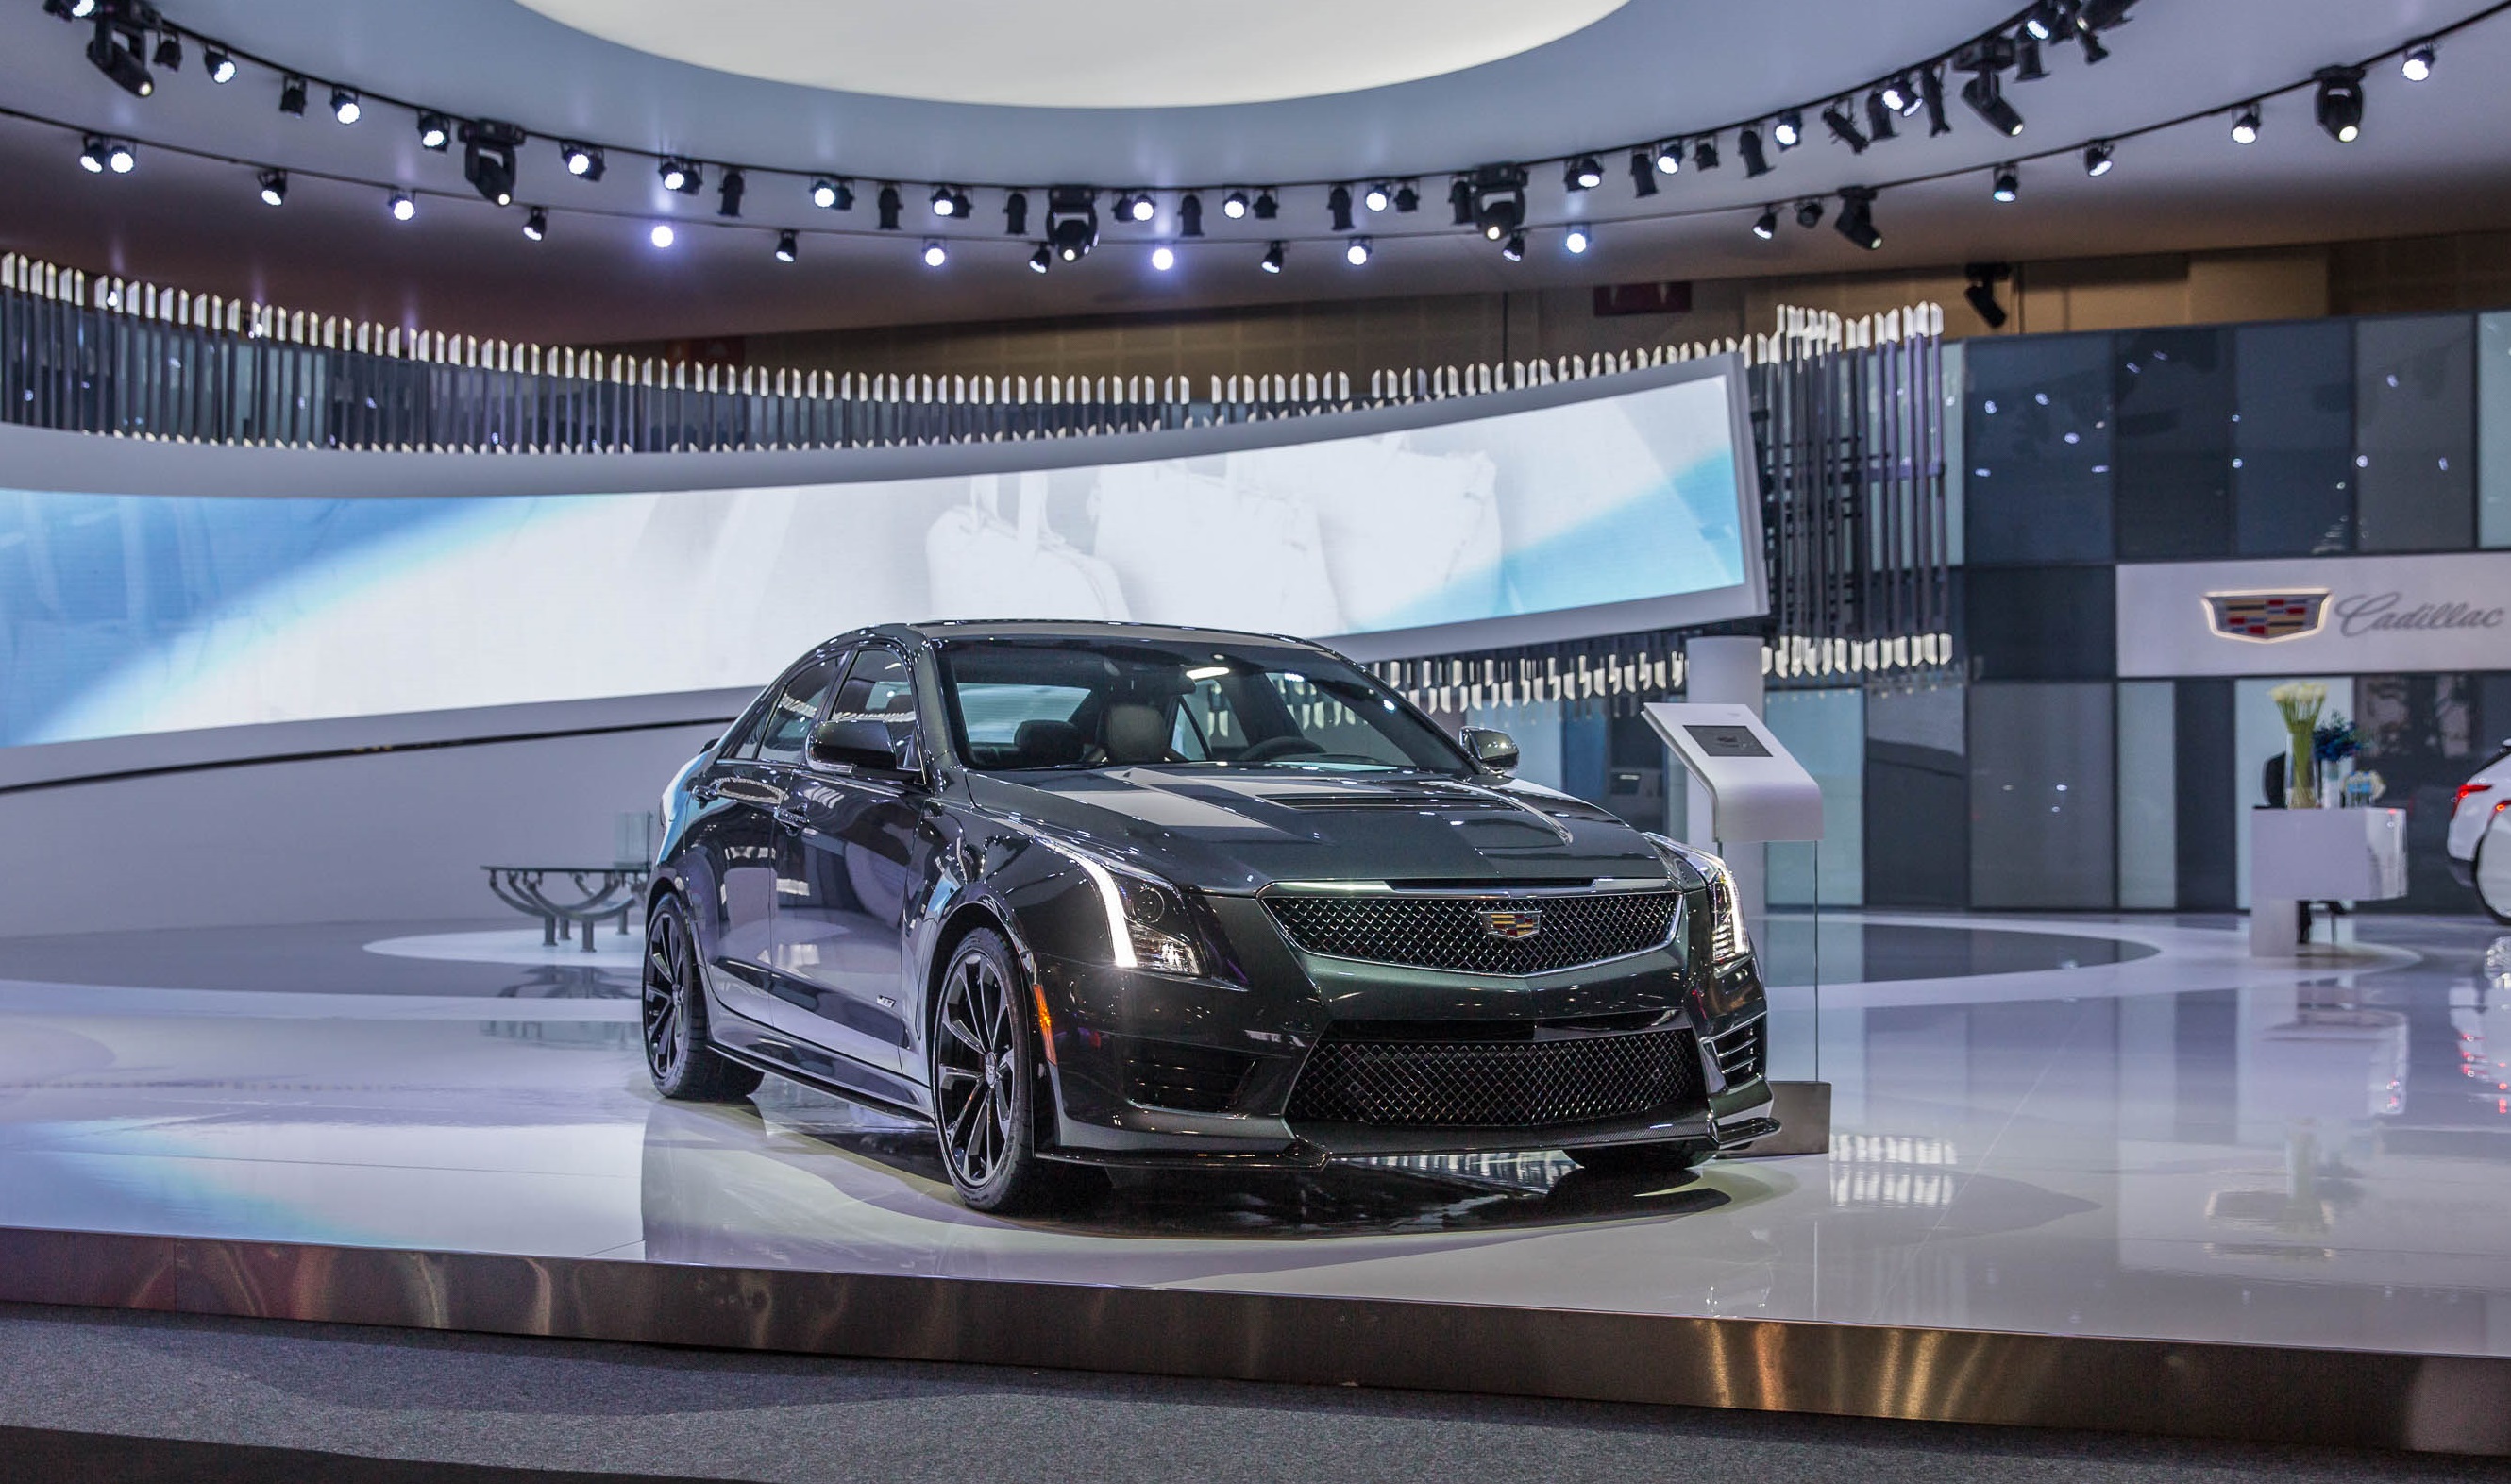 Cadillac Sheds Light on Its Next Level of Race-Inspired Cars at DIMS